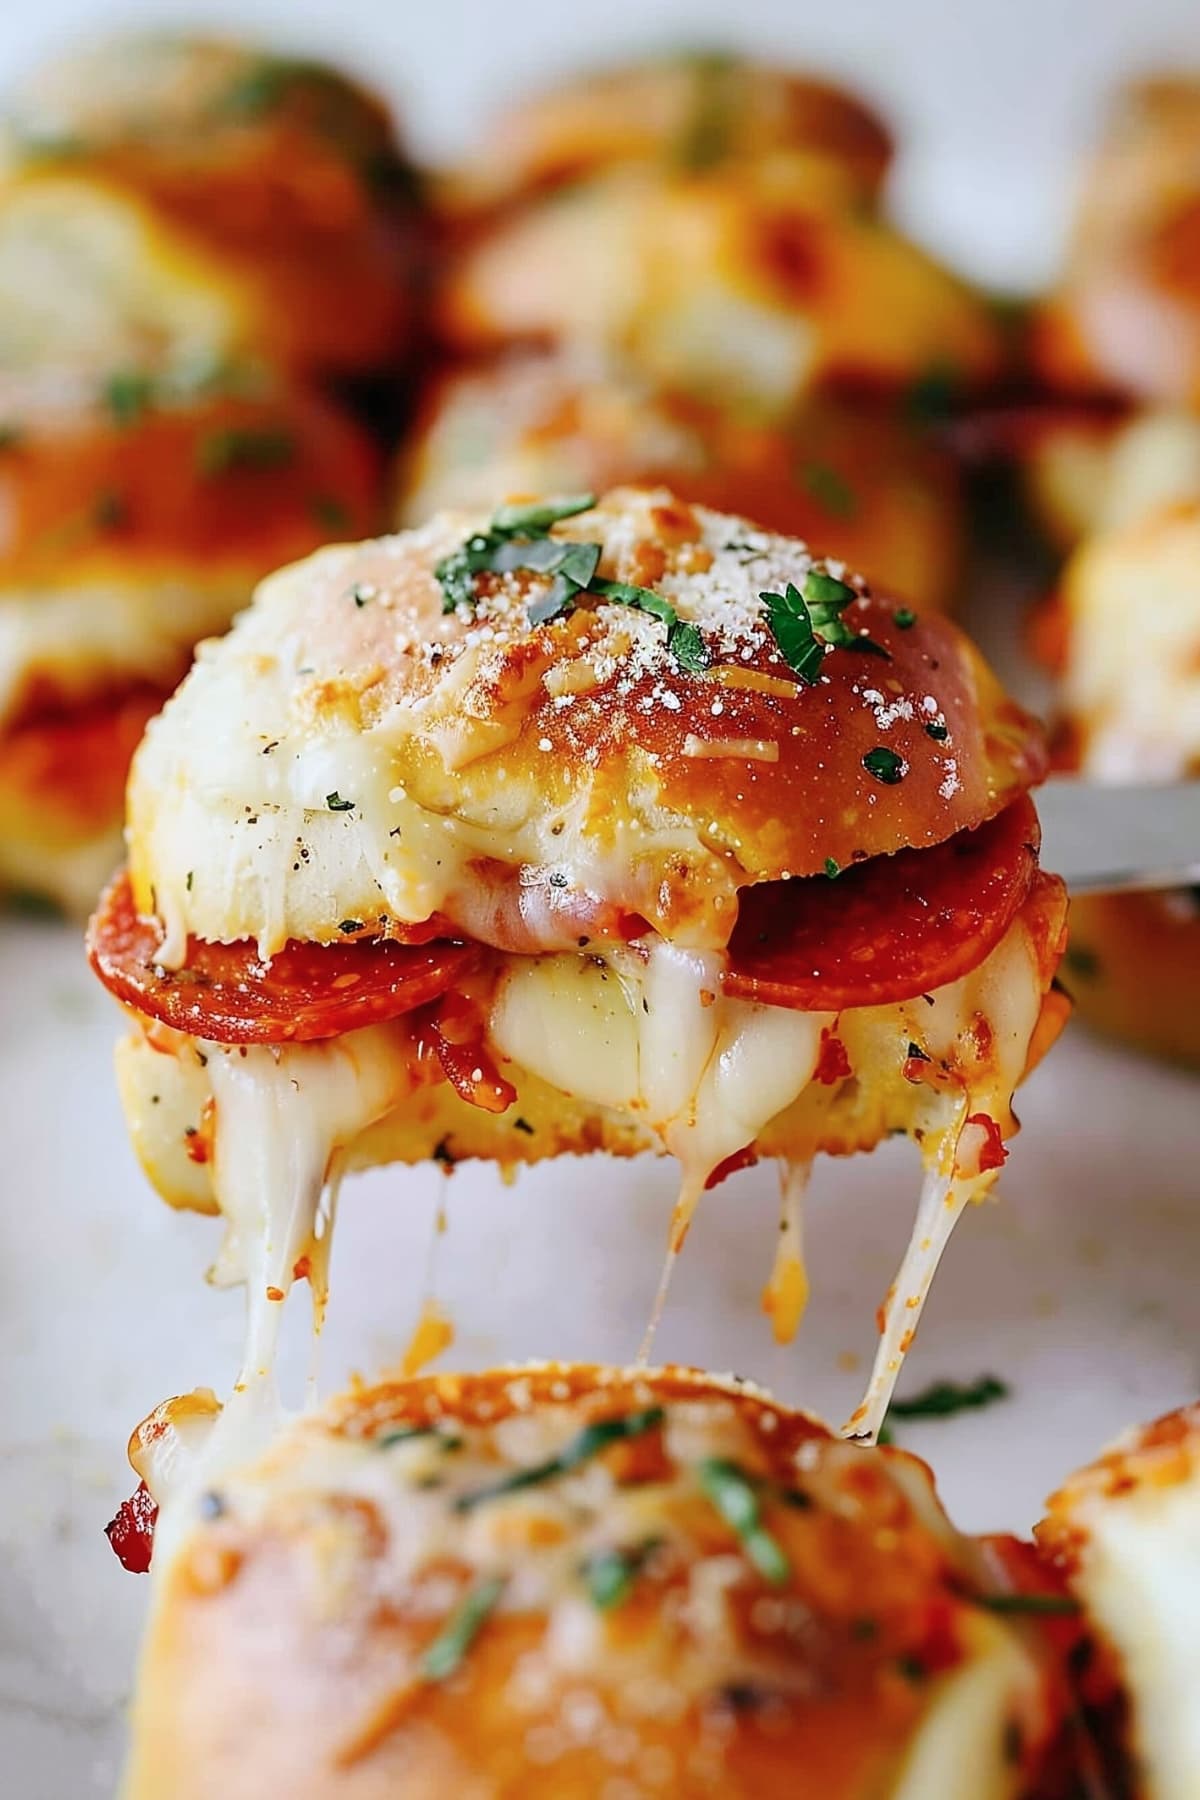 Cheesy,herby and delicious homemade pizza sliders